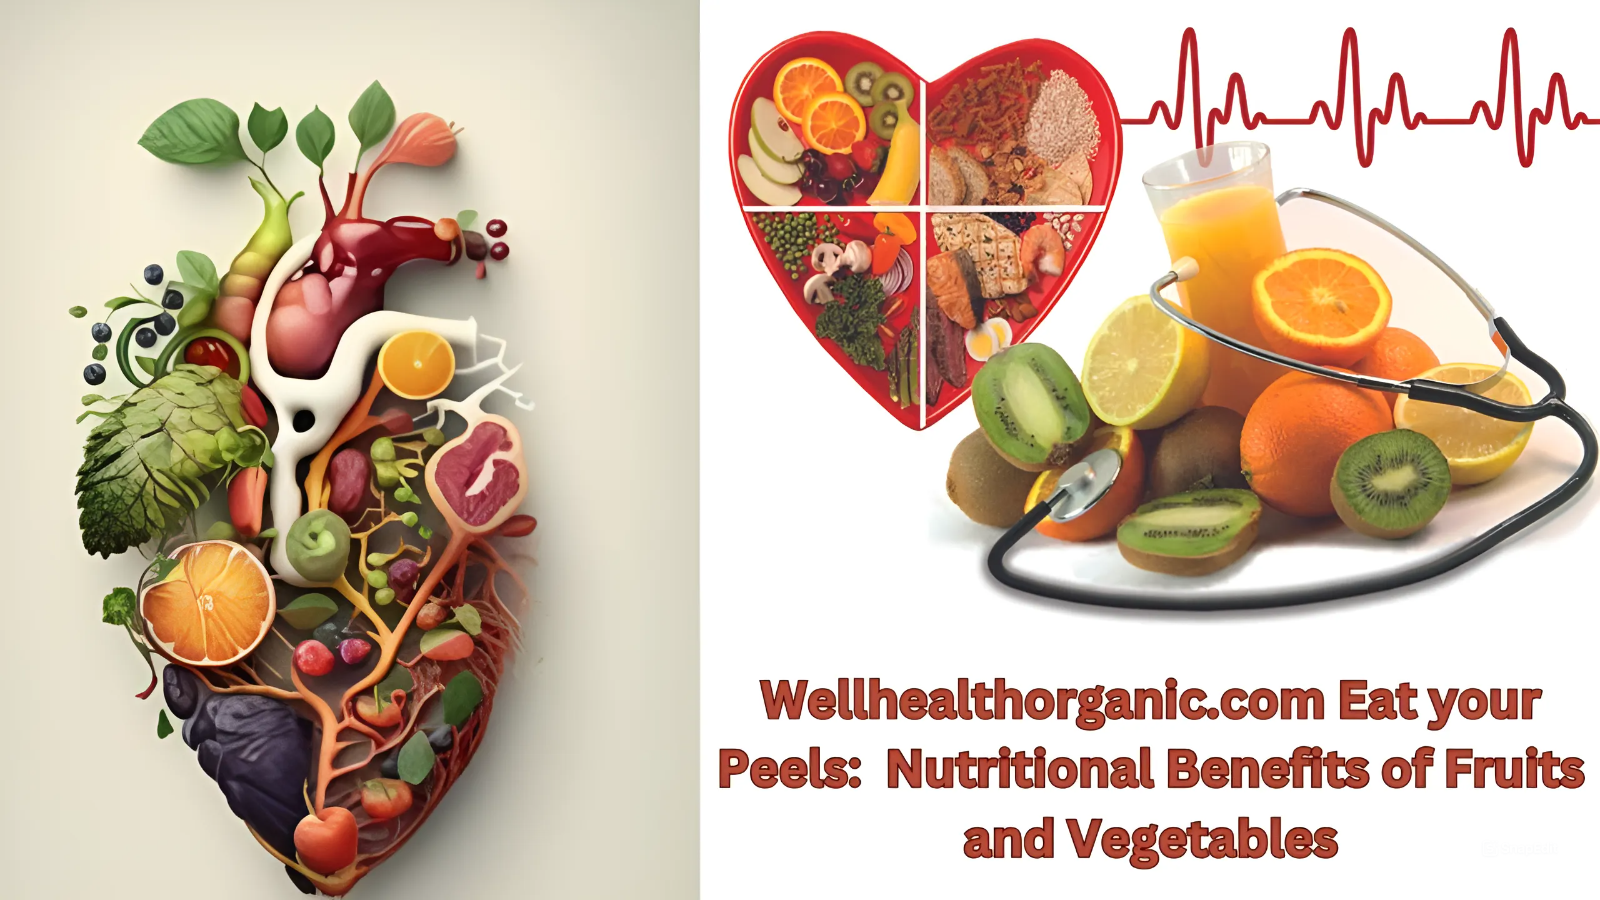 Wellhealthorganic.com Eat your Peels:  Nutritional Benefits of Fruits and Vegetables